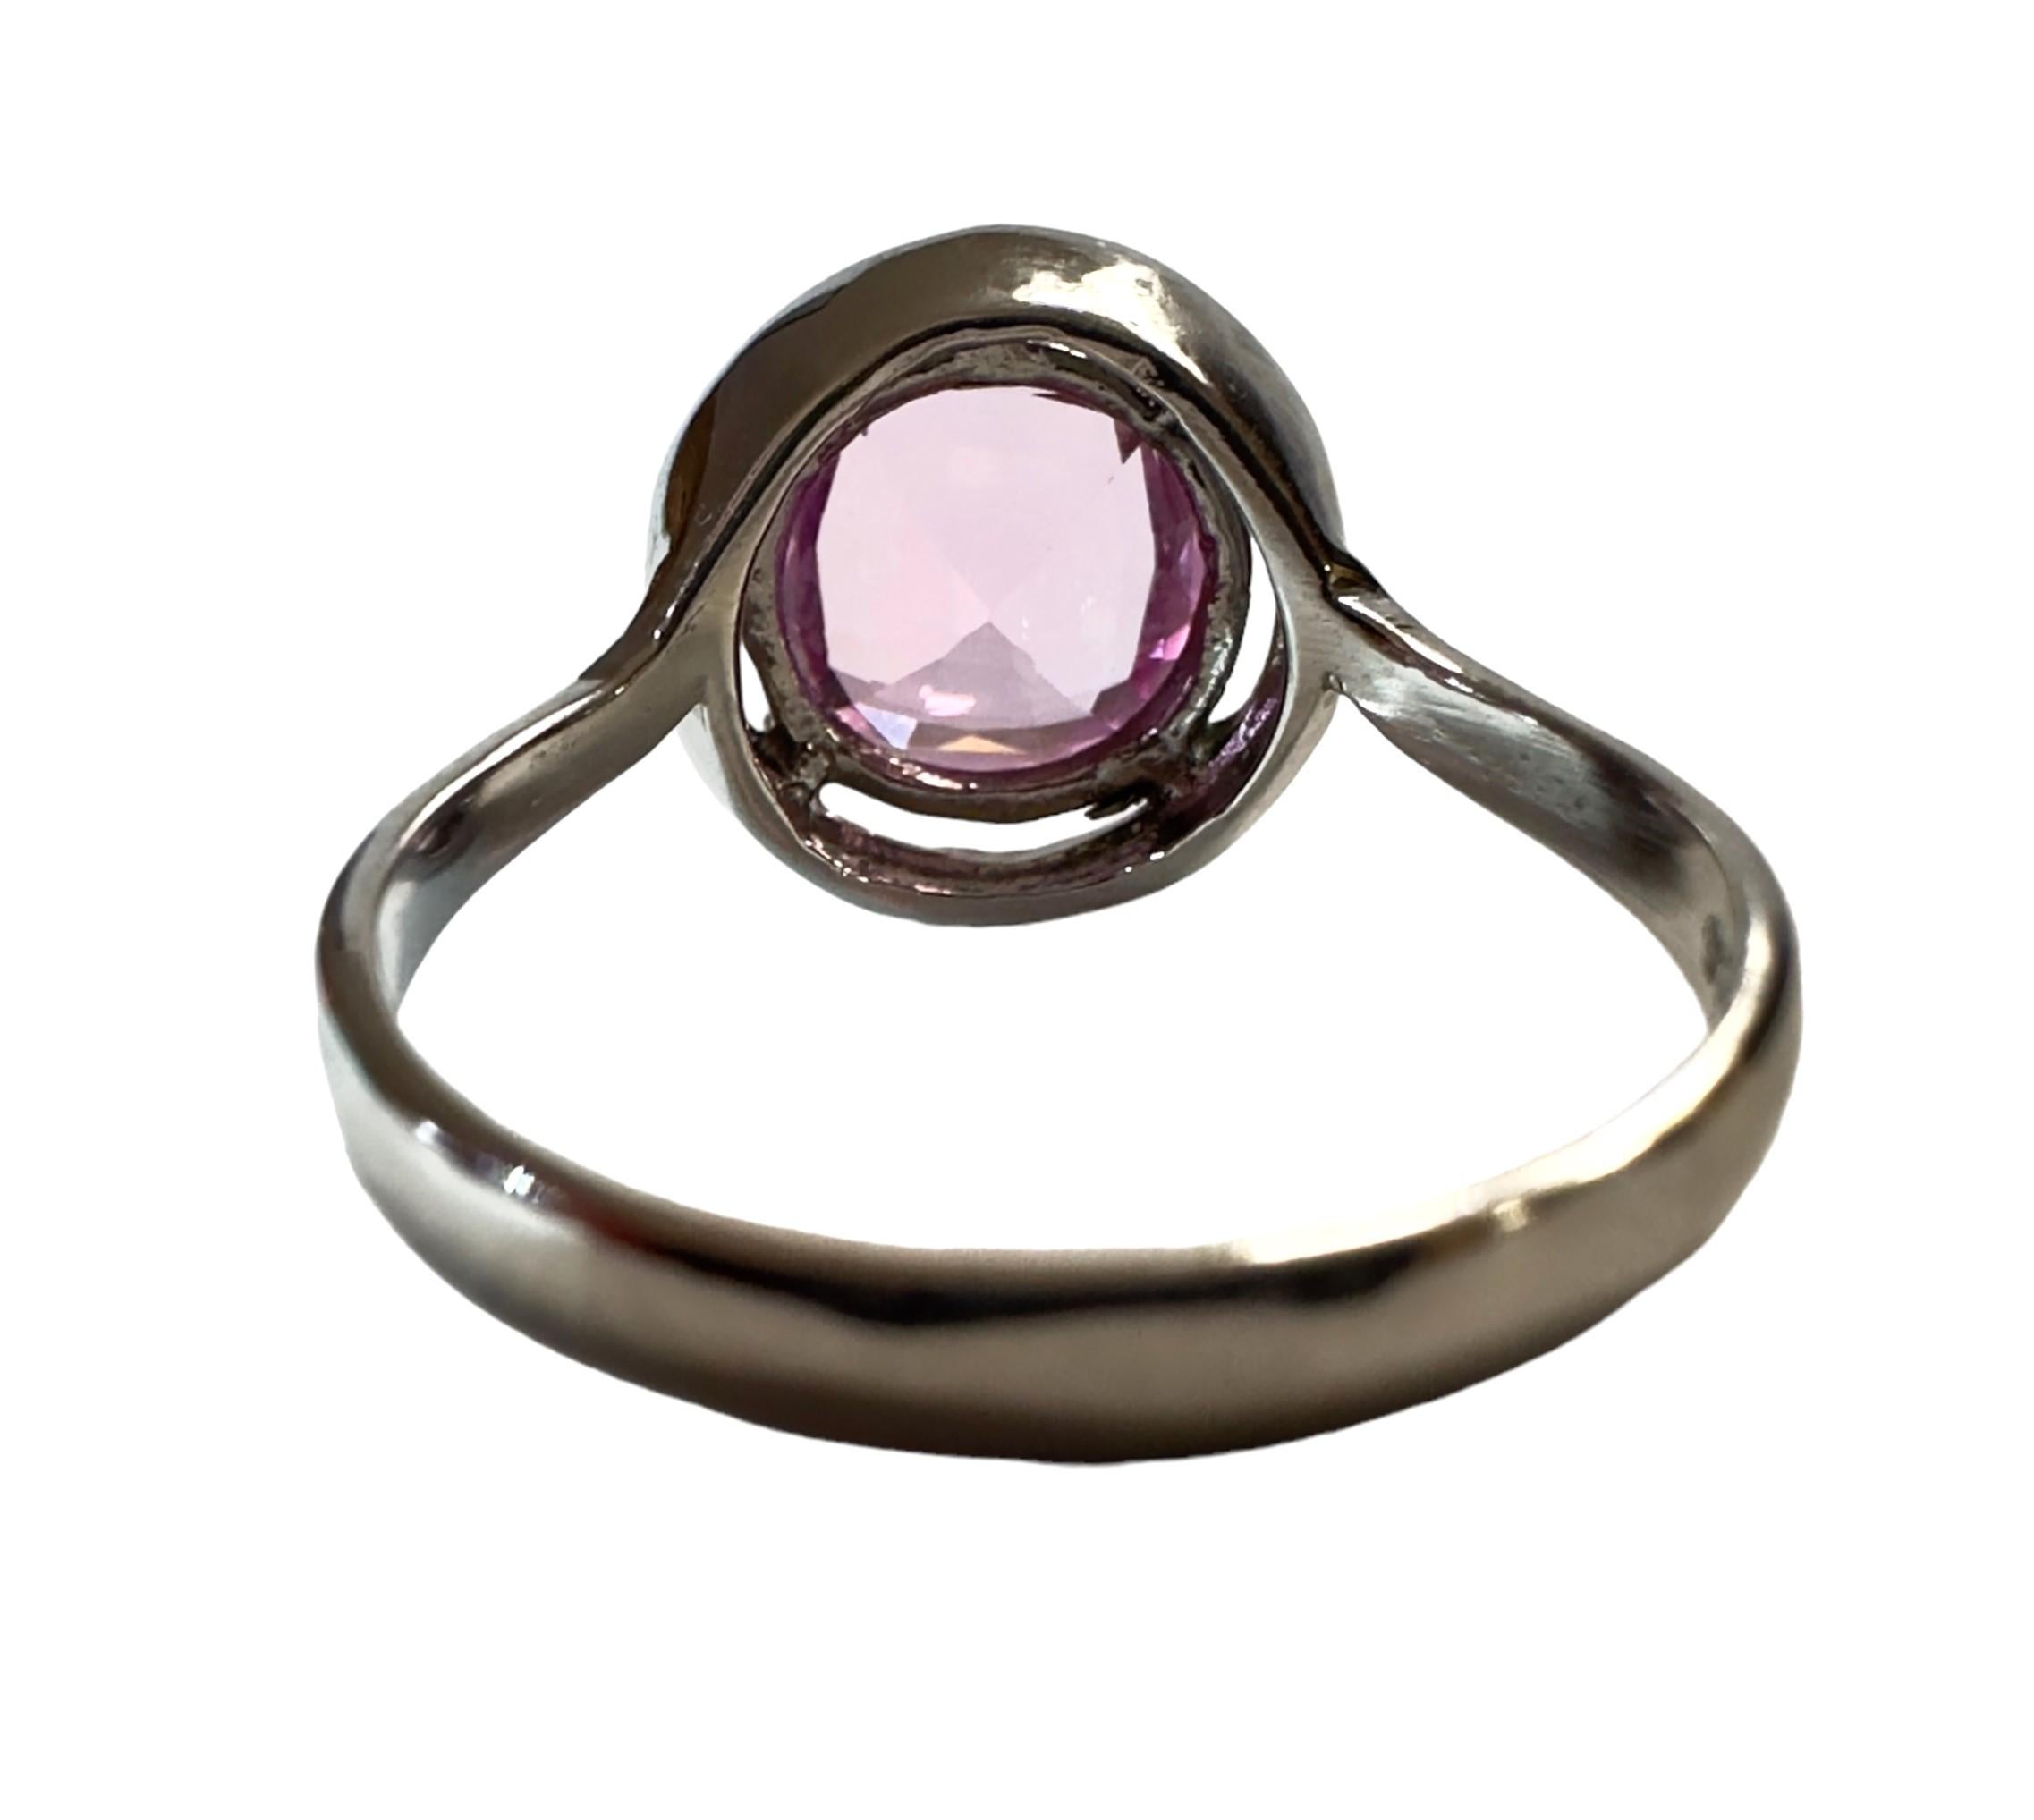 Women's New African 3.30 Ct Pink Sapphire Sterling Ring Size 7.75 For Sale